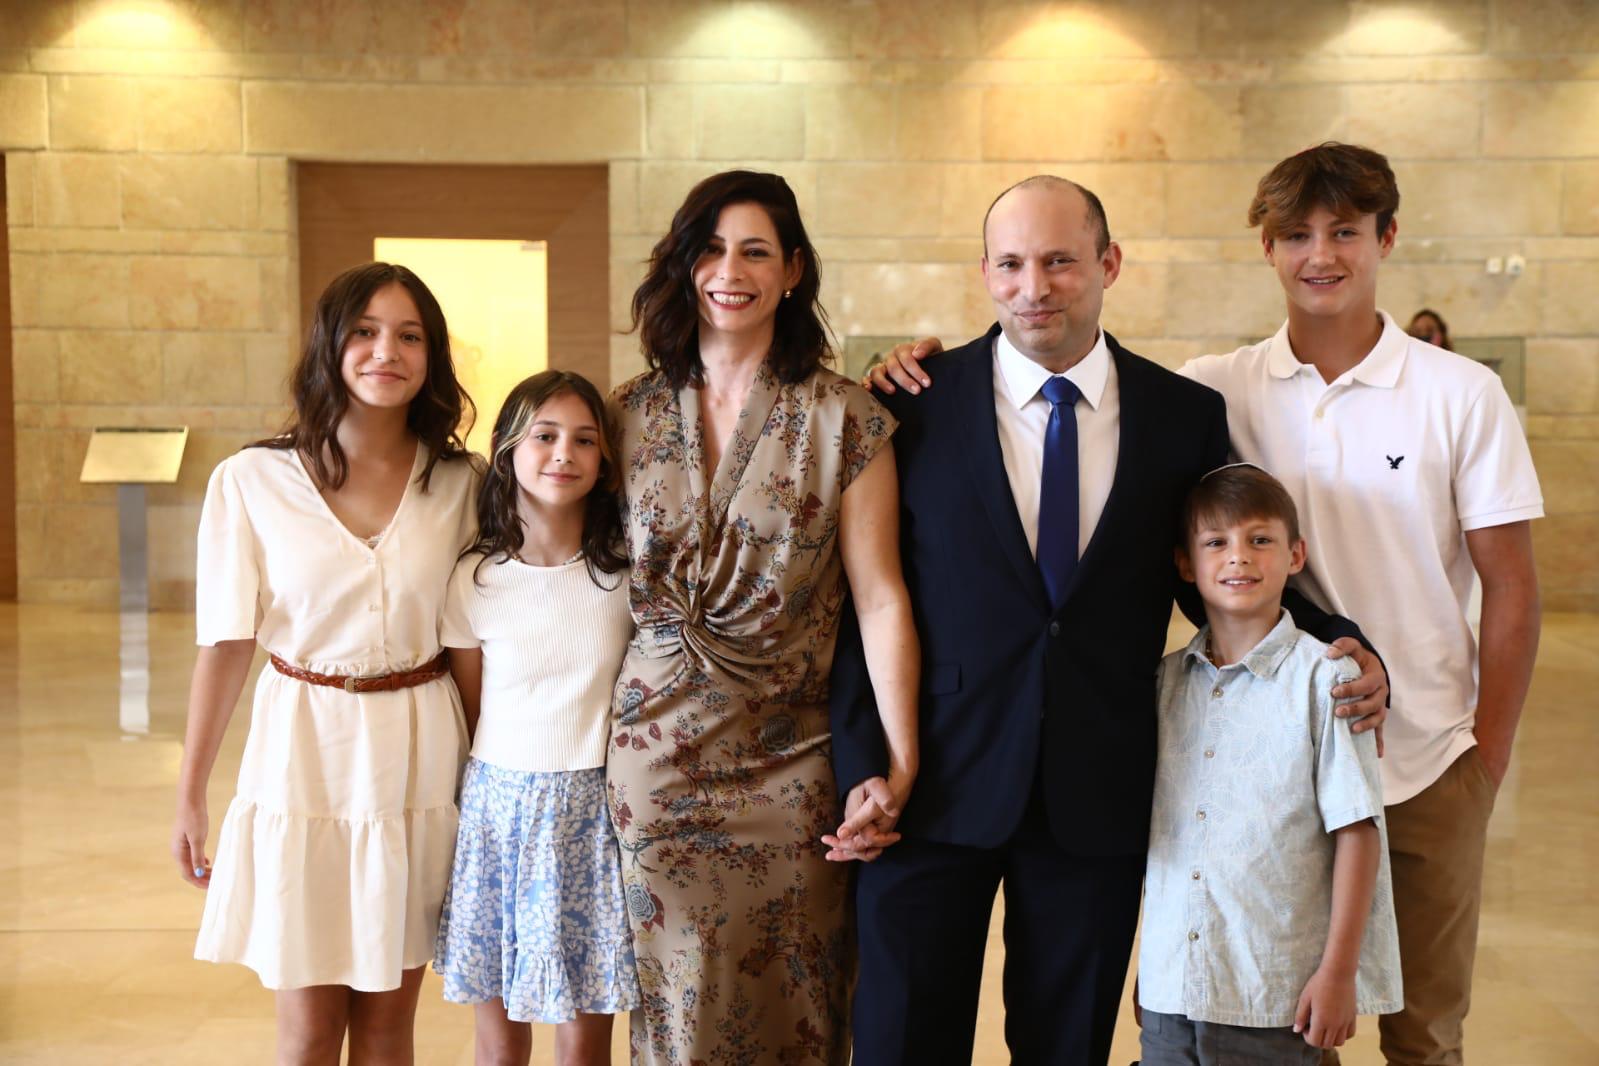 Bennett's wife, kids go on vacation abroad despite PM urging against flying  overseas